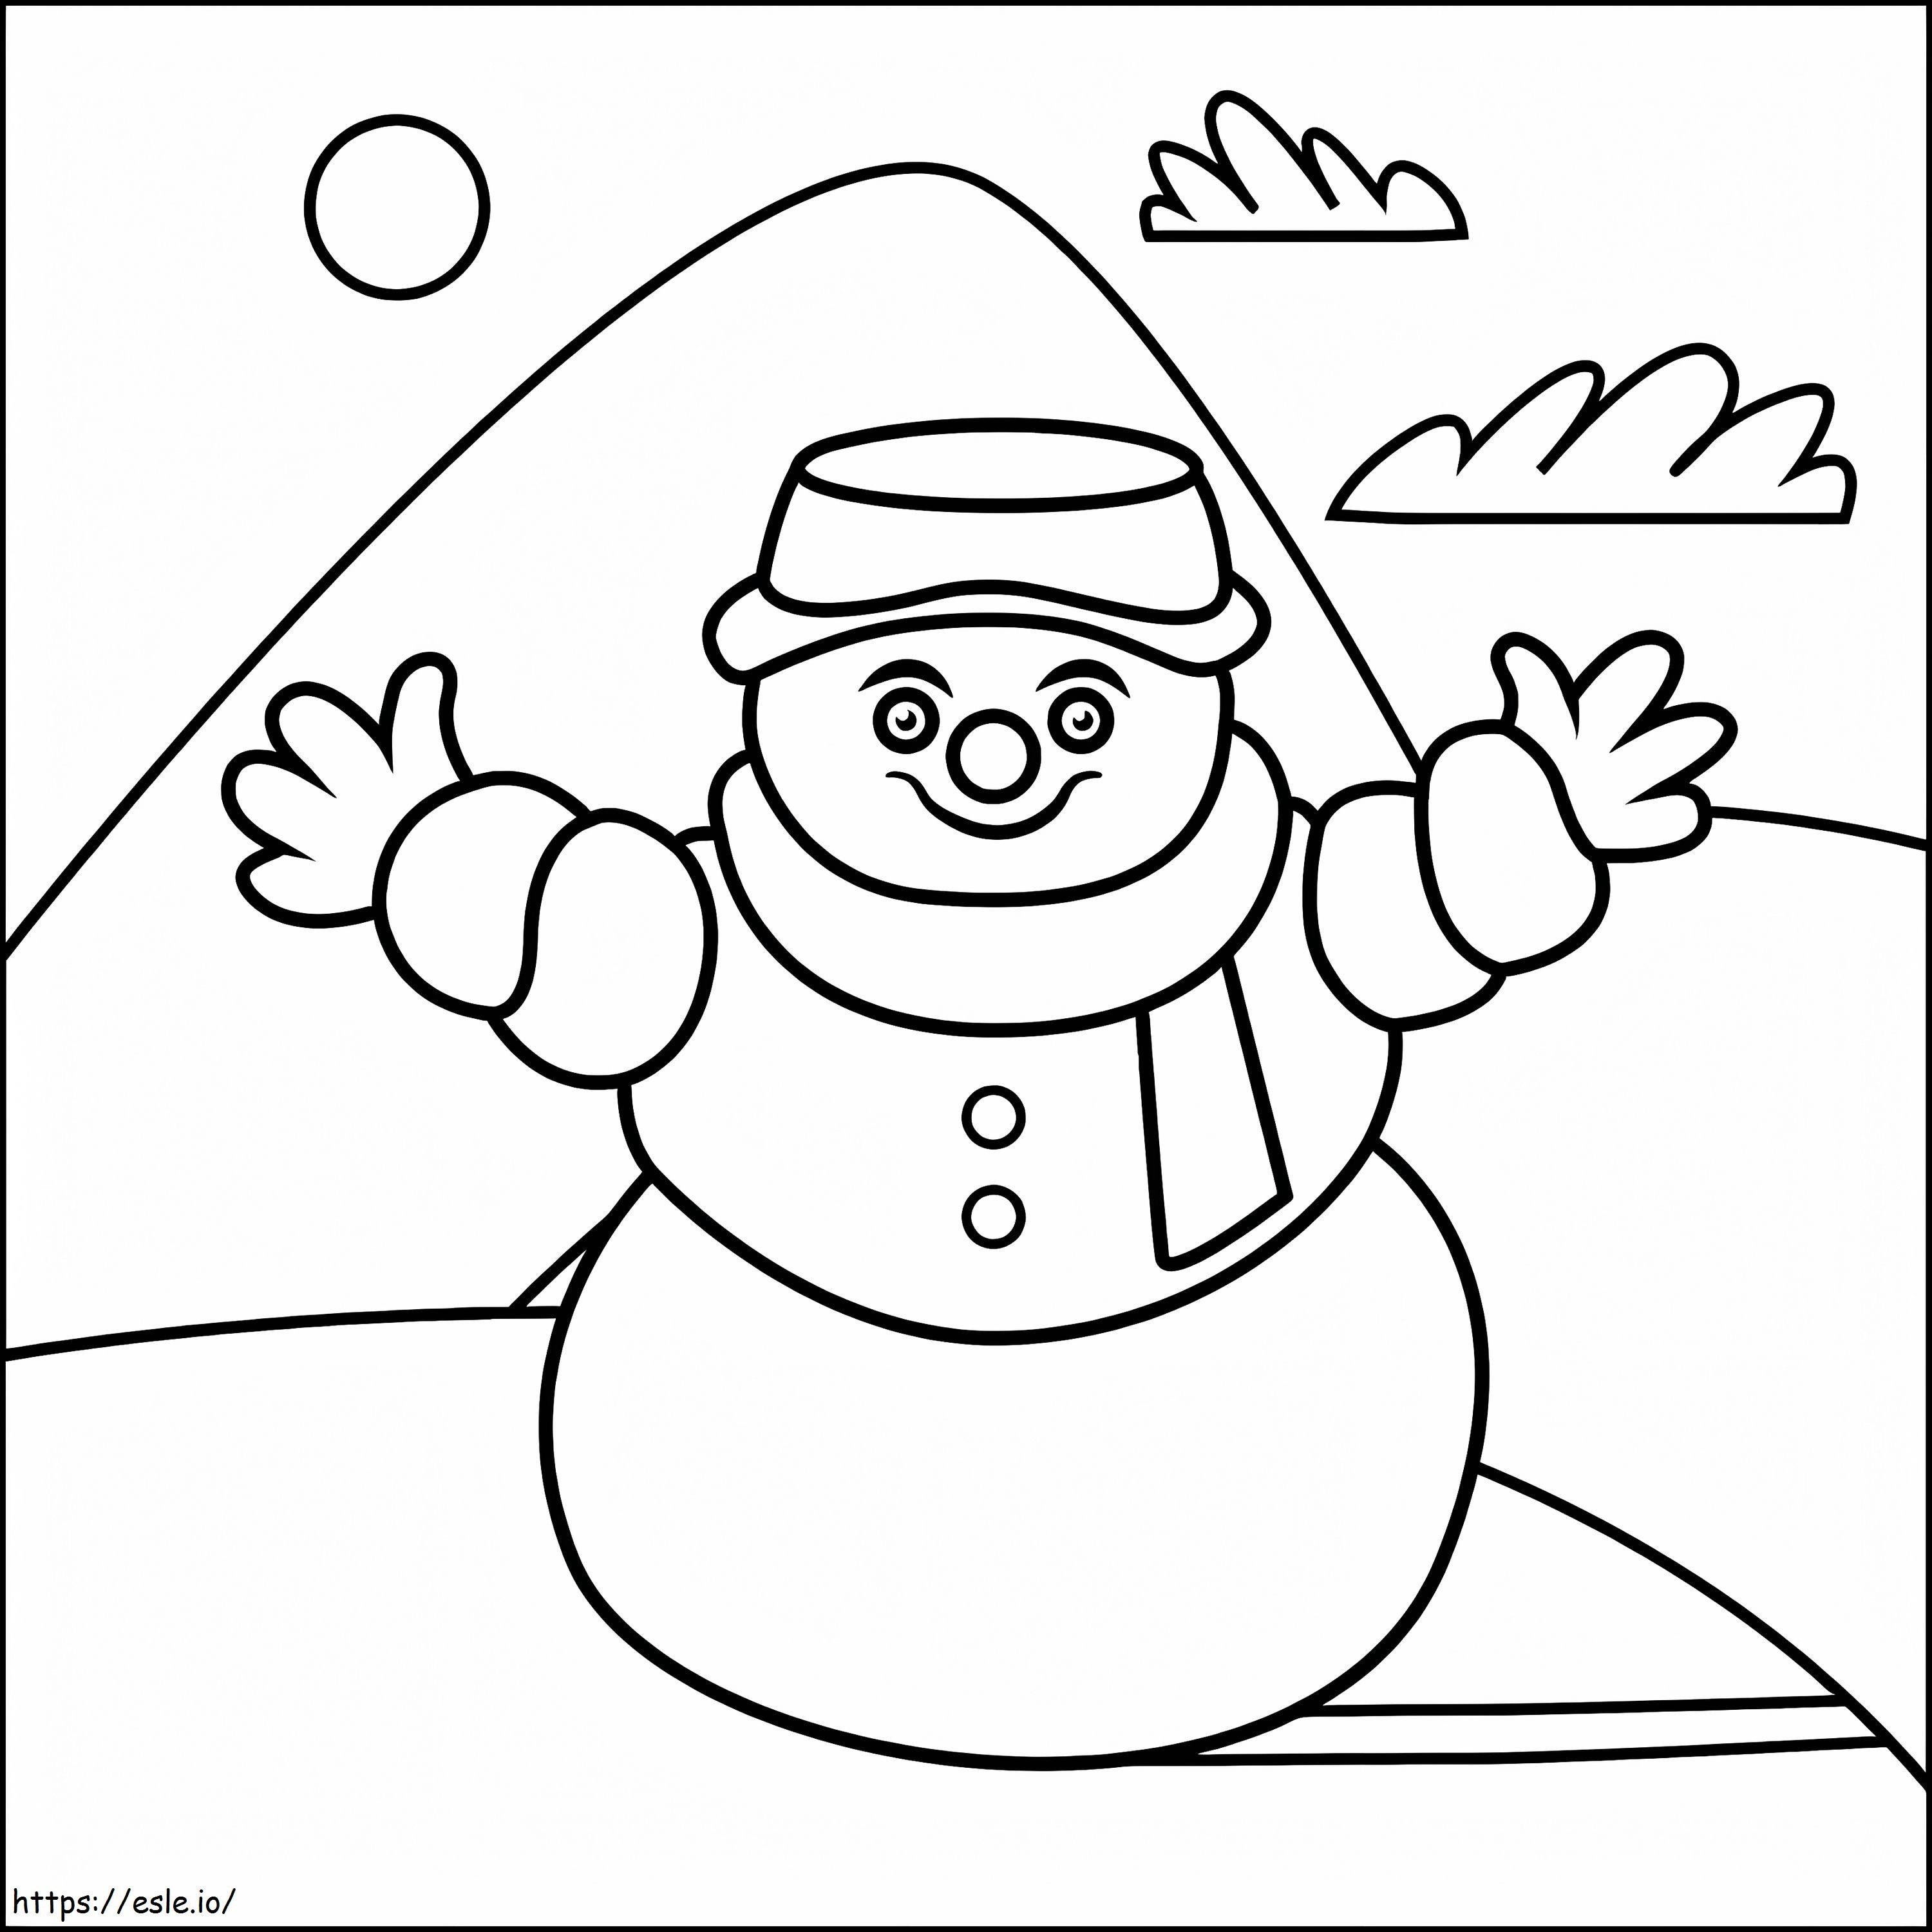 Simple Snowman 1 coloring page